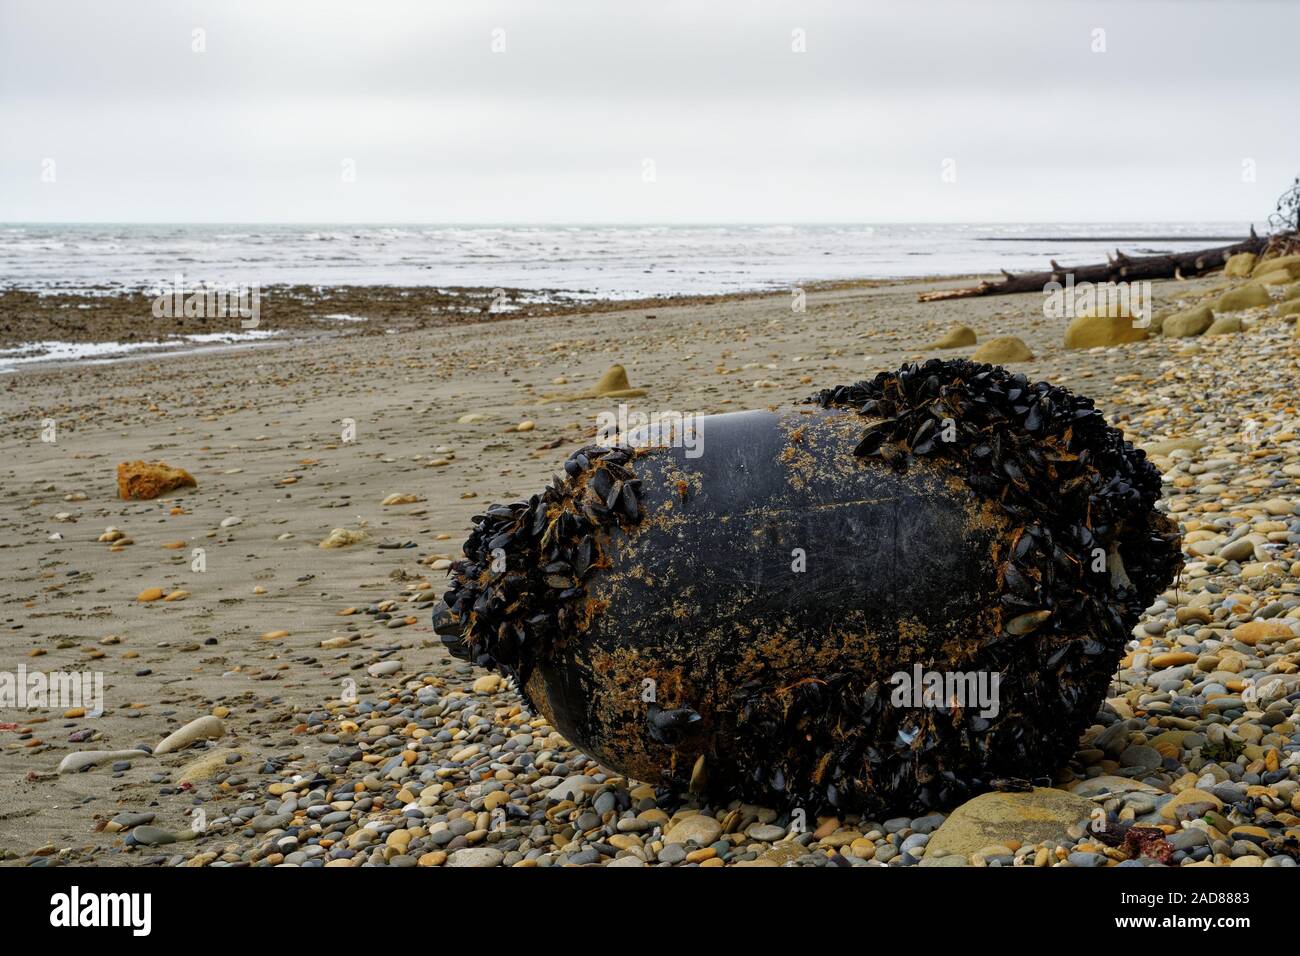 A mussel buoy from an aquaculture mussel farm washed up on Kina beach, New Zealand. Stock Photo